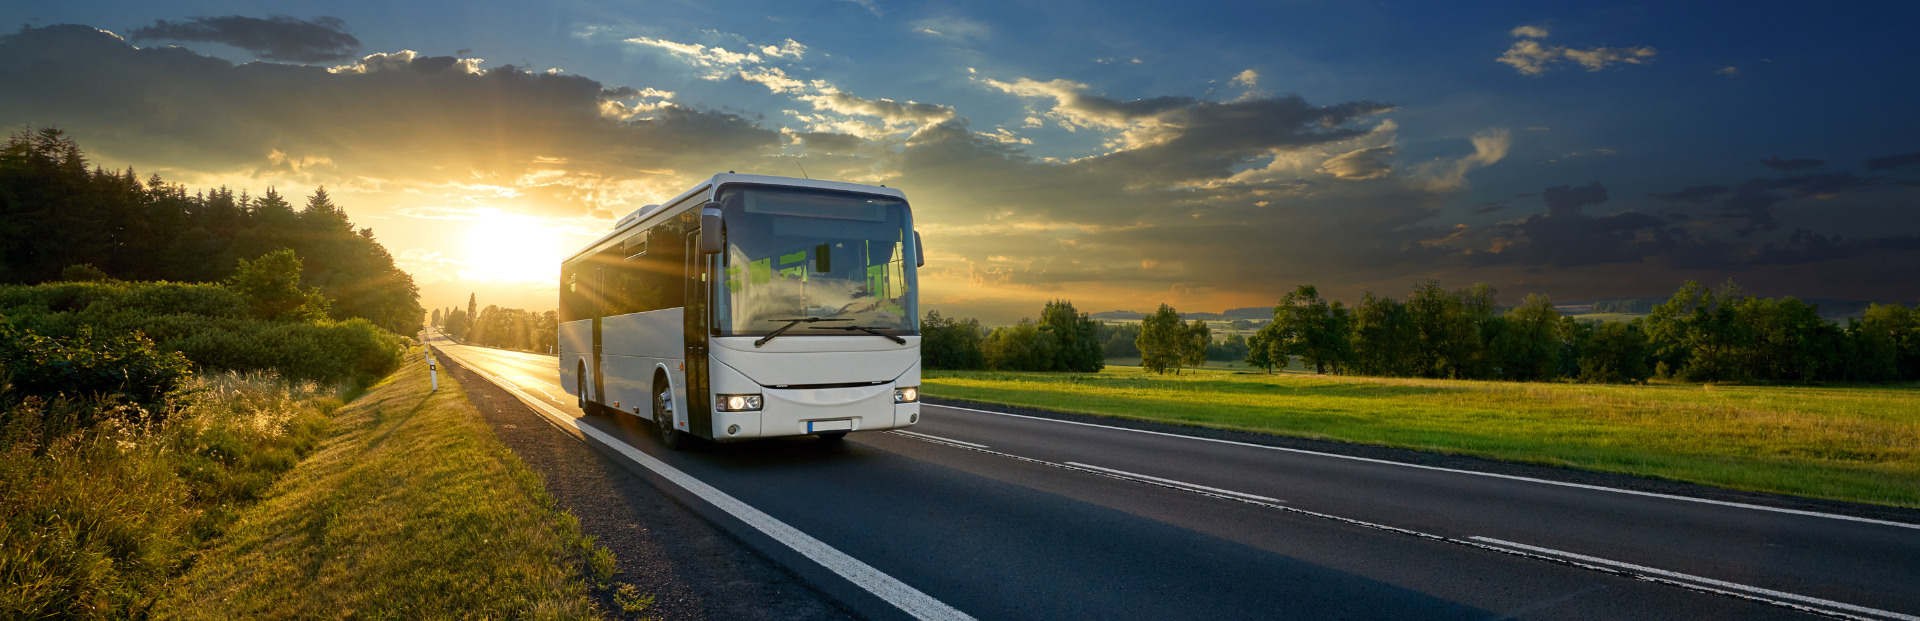 Taking the journey to the next level with free Wi-Fi on board for Flixbus